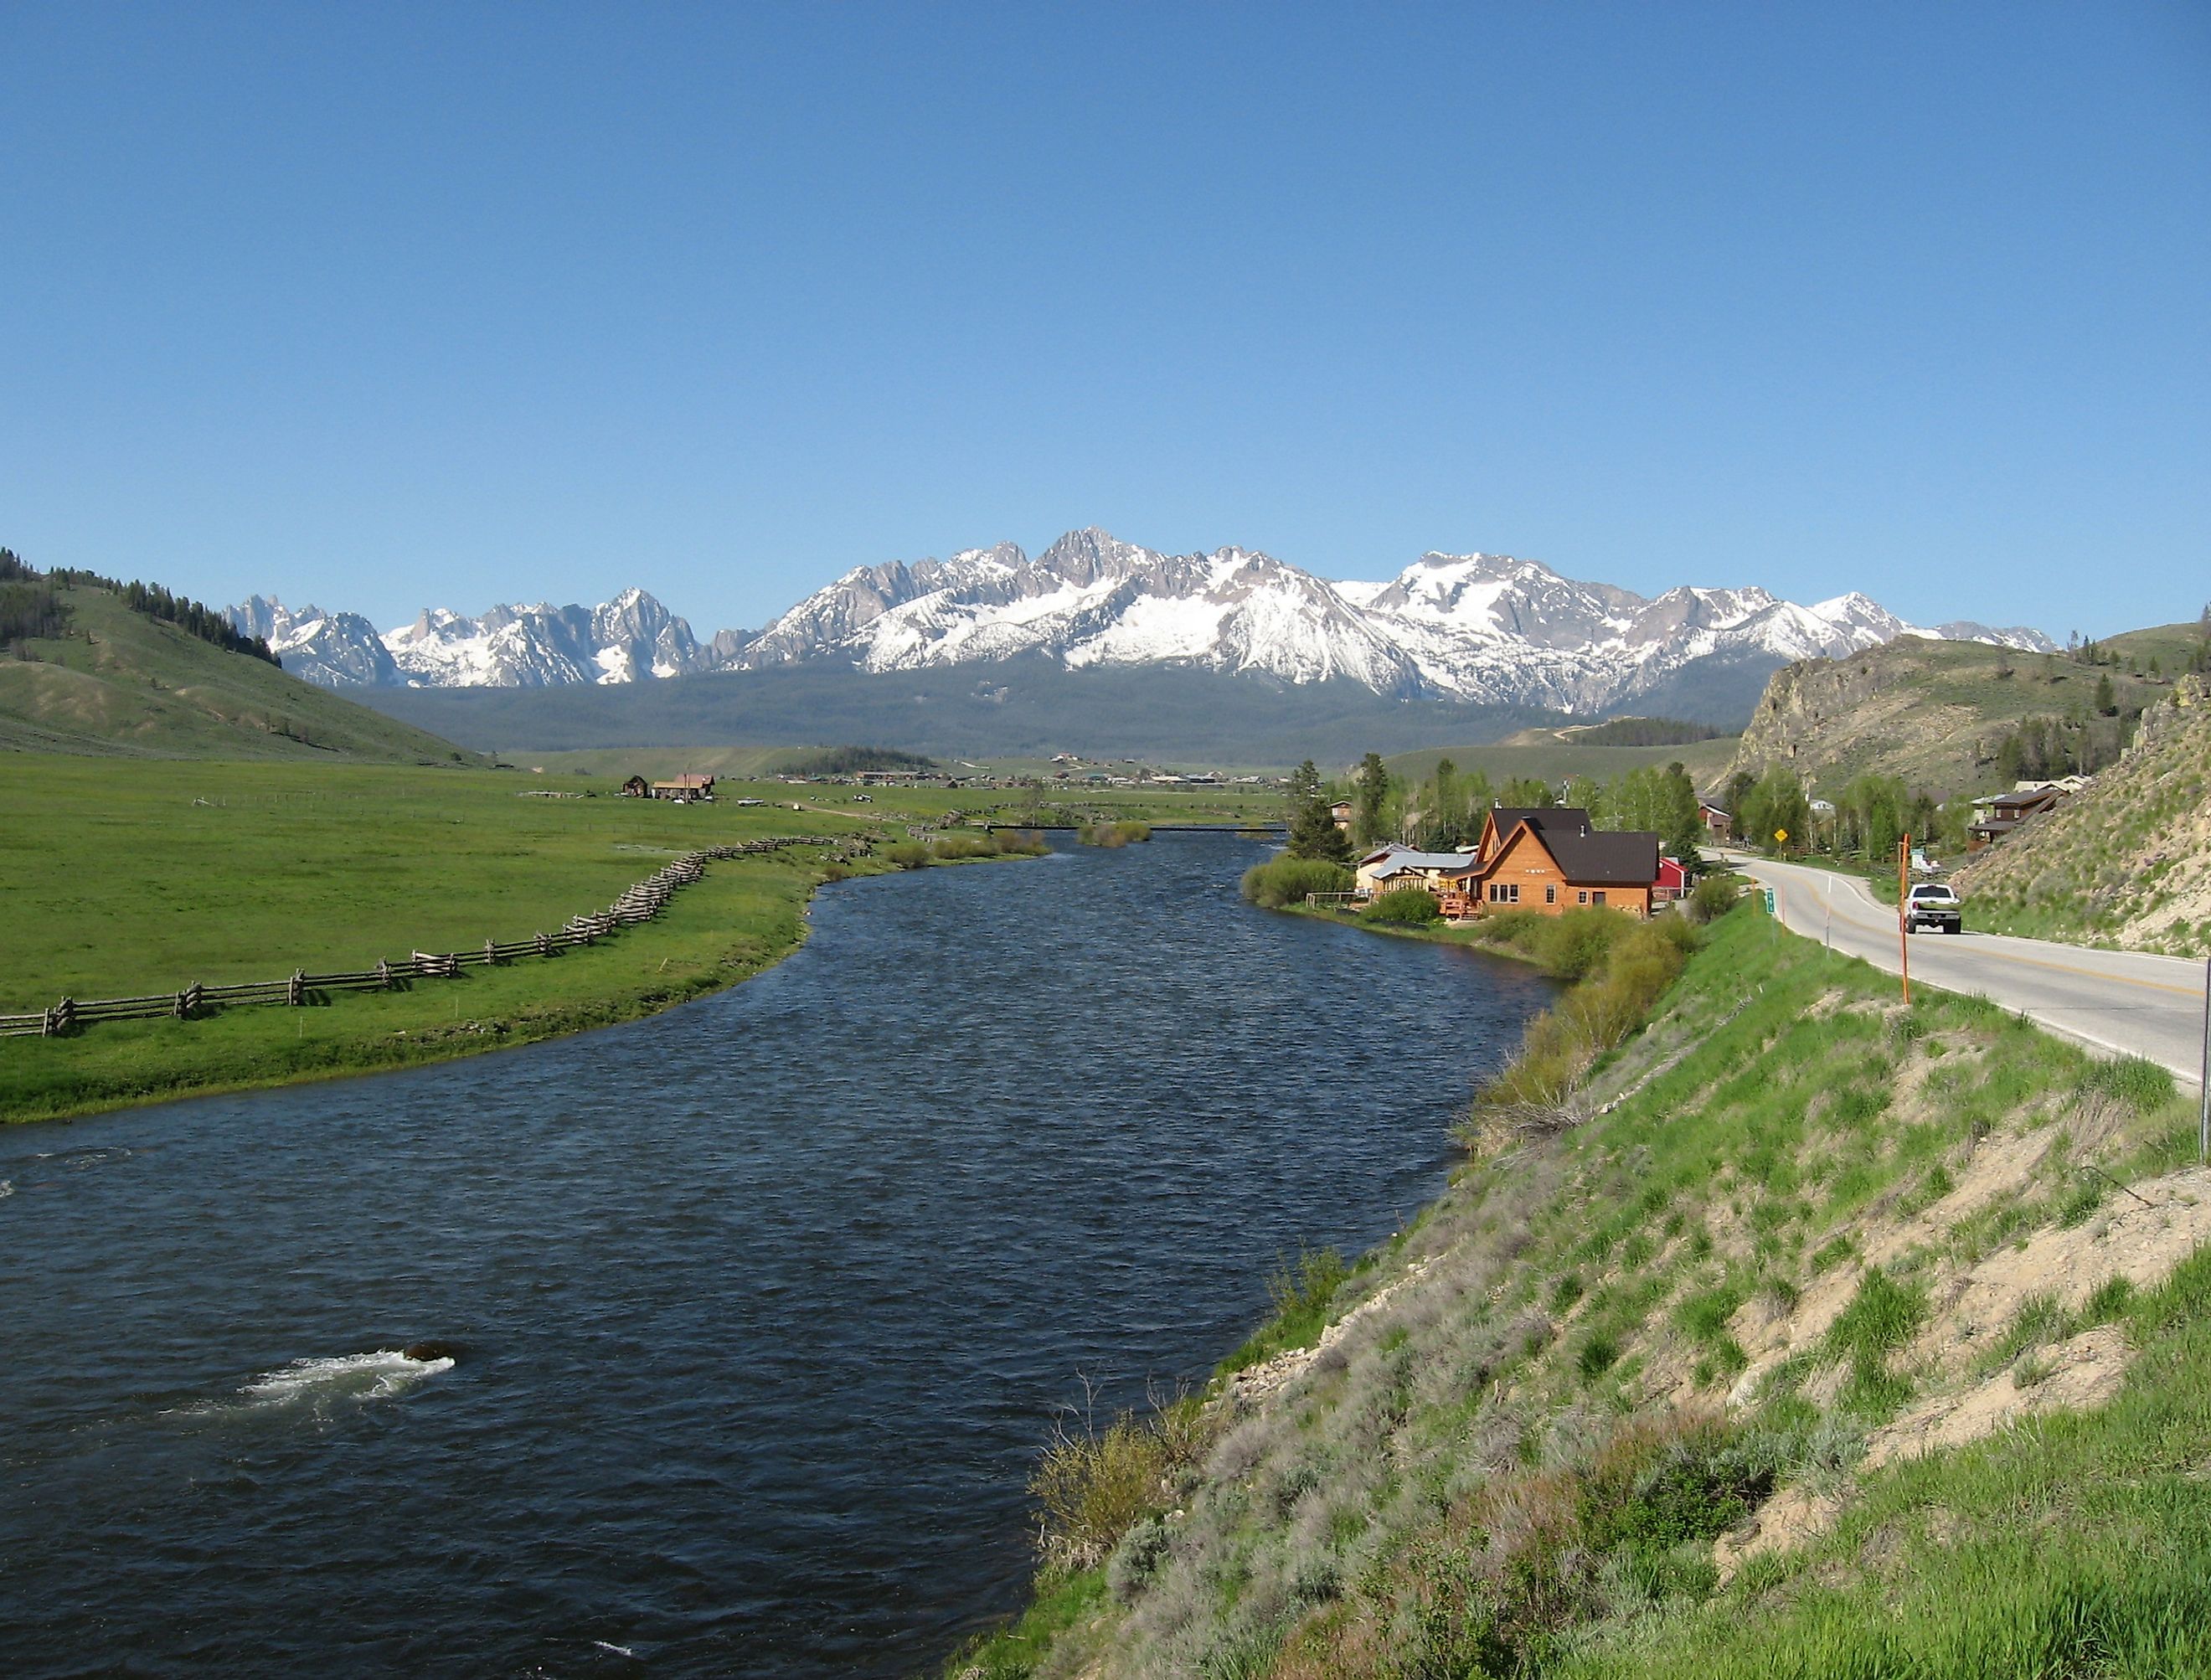 Salmon River and Sawtooth Mountains in Stanley, Idaho. Image credit: Fredlyfish4 via shutterstock